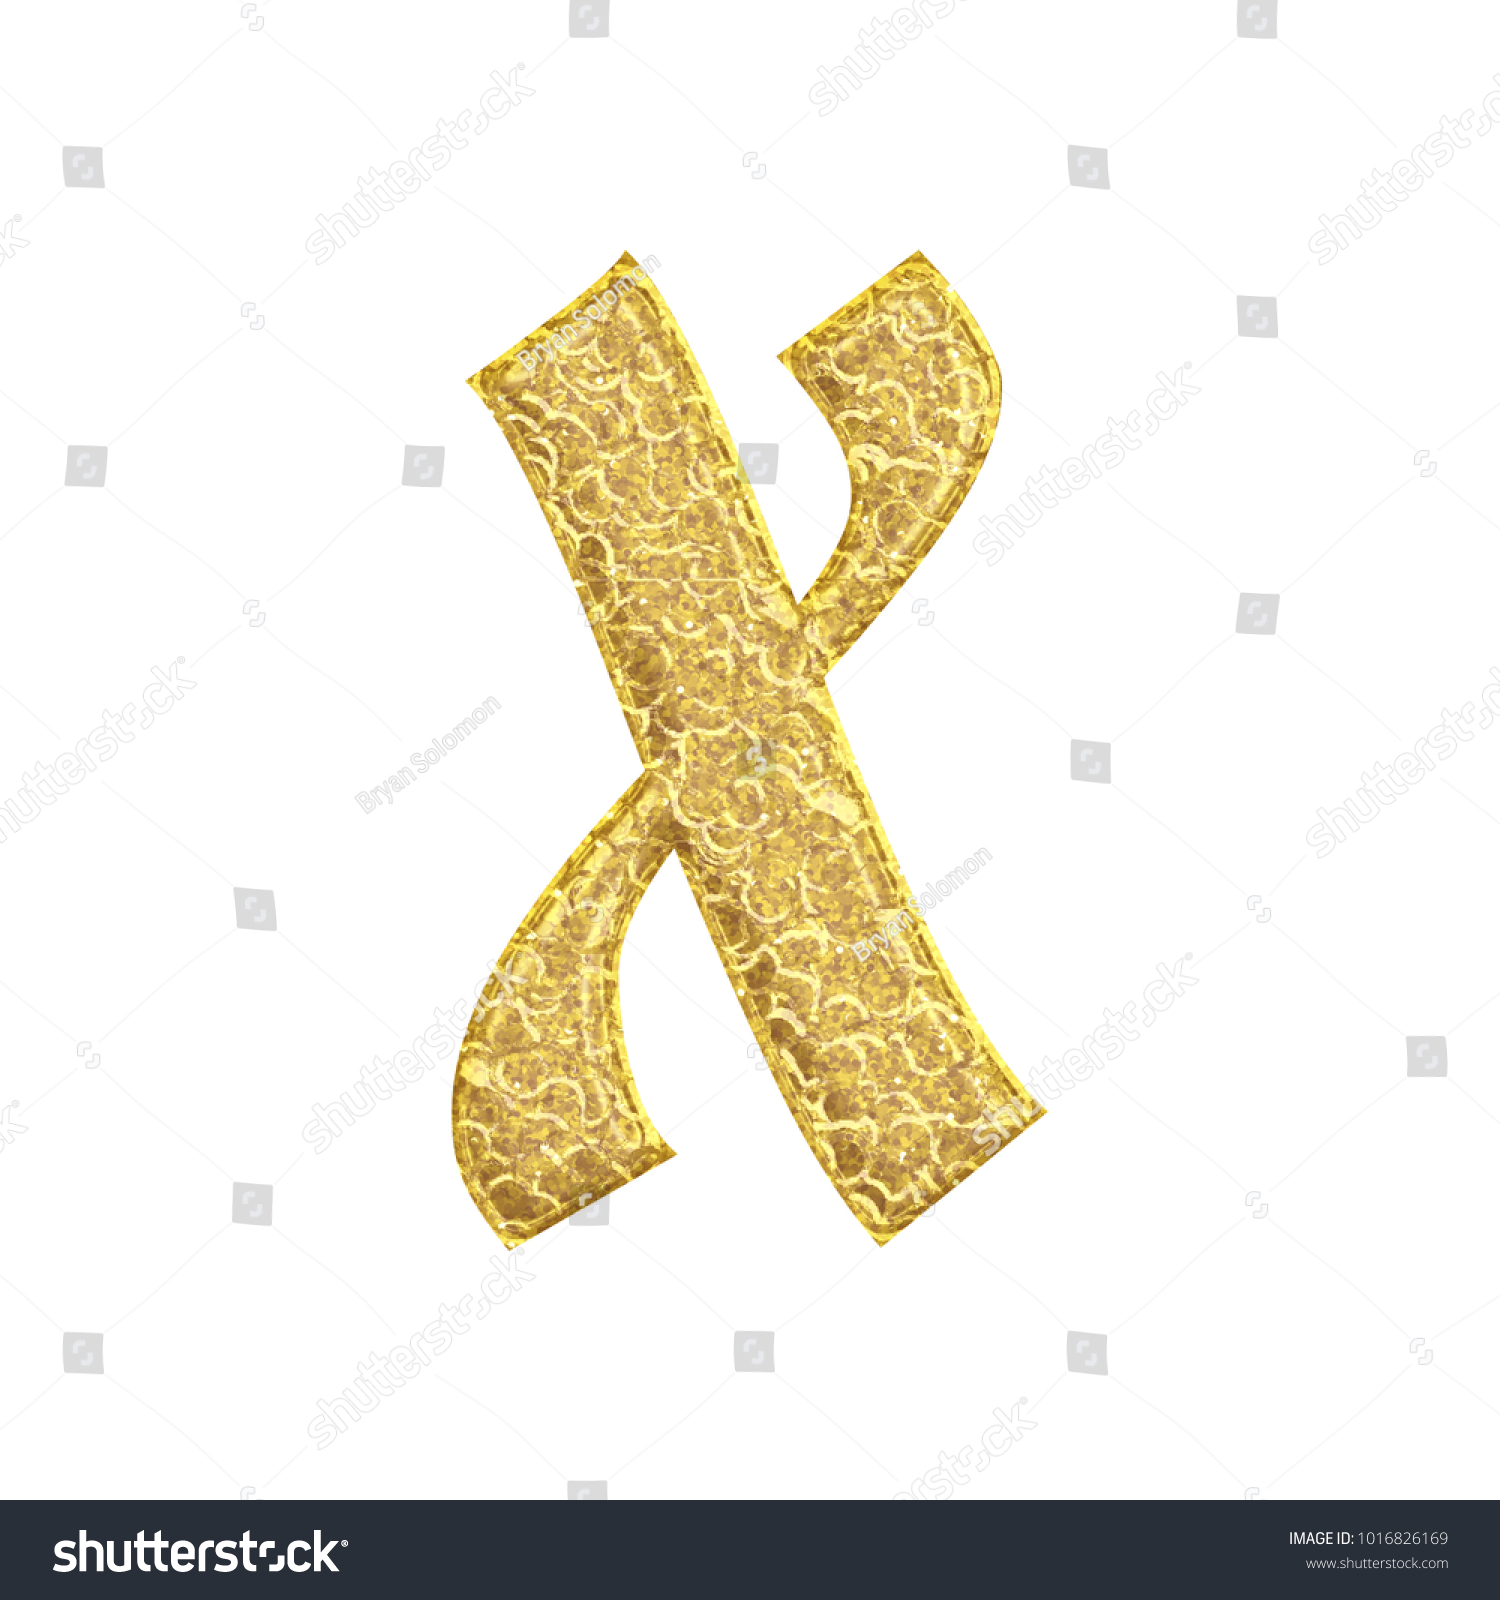 Aged Gold Rough Cracked Golden Lowercase Stock Illustration ...